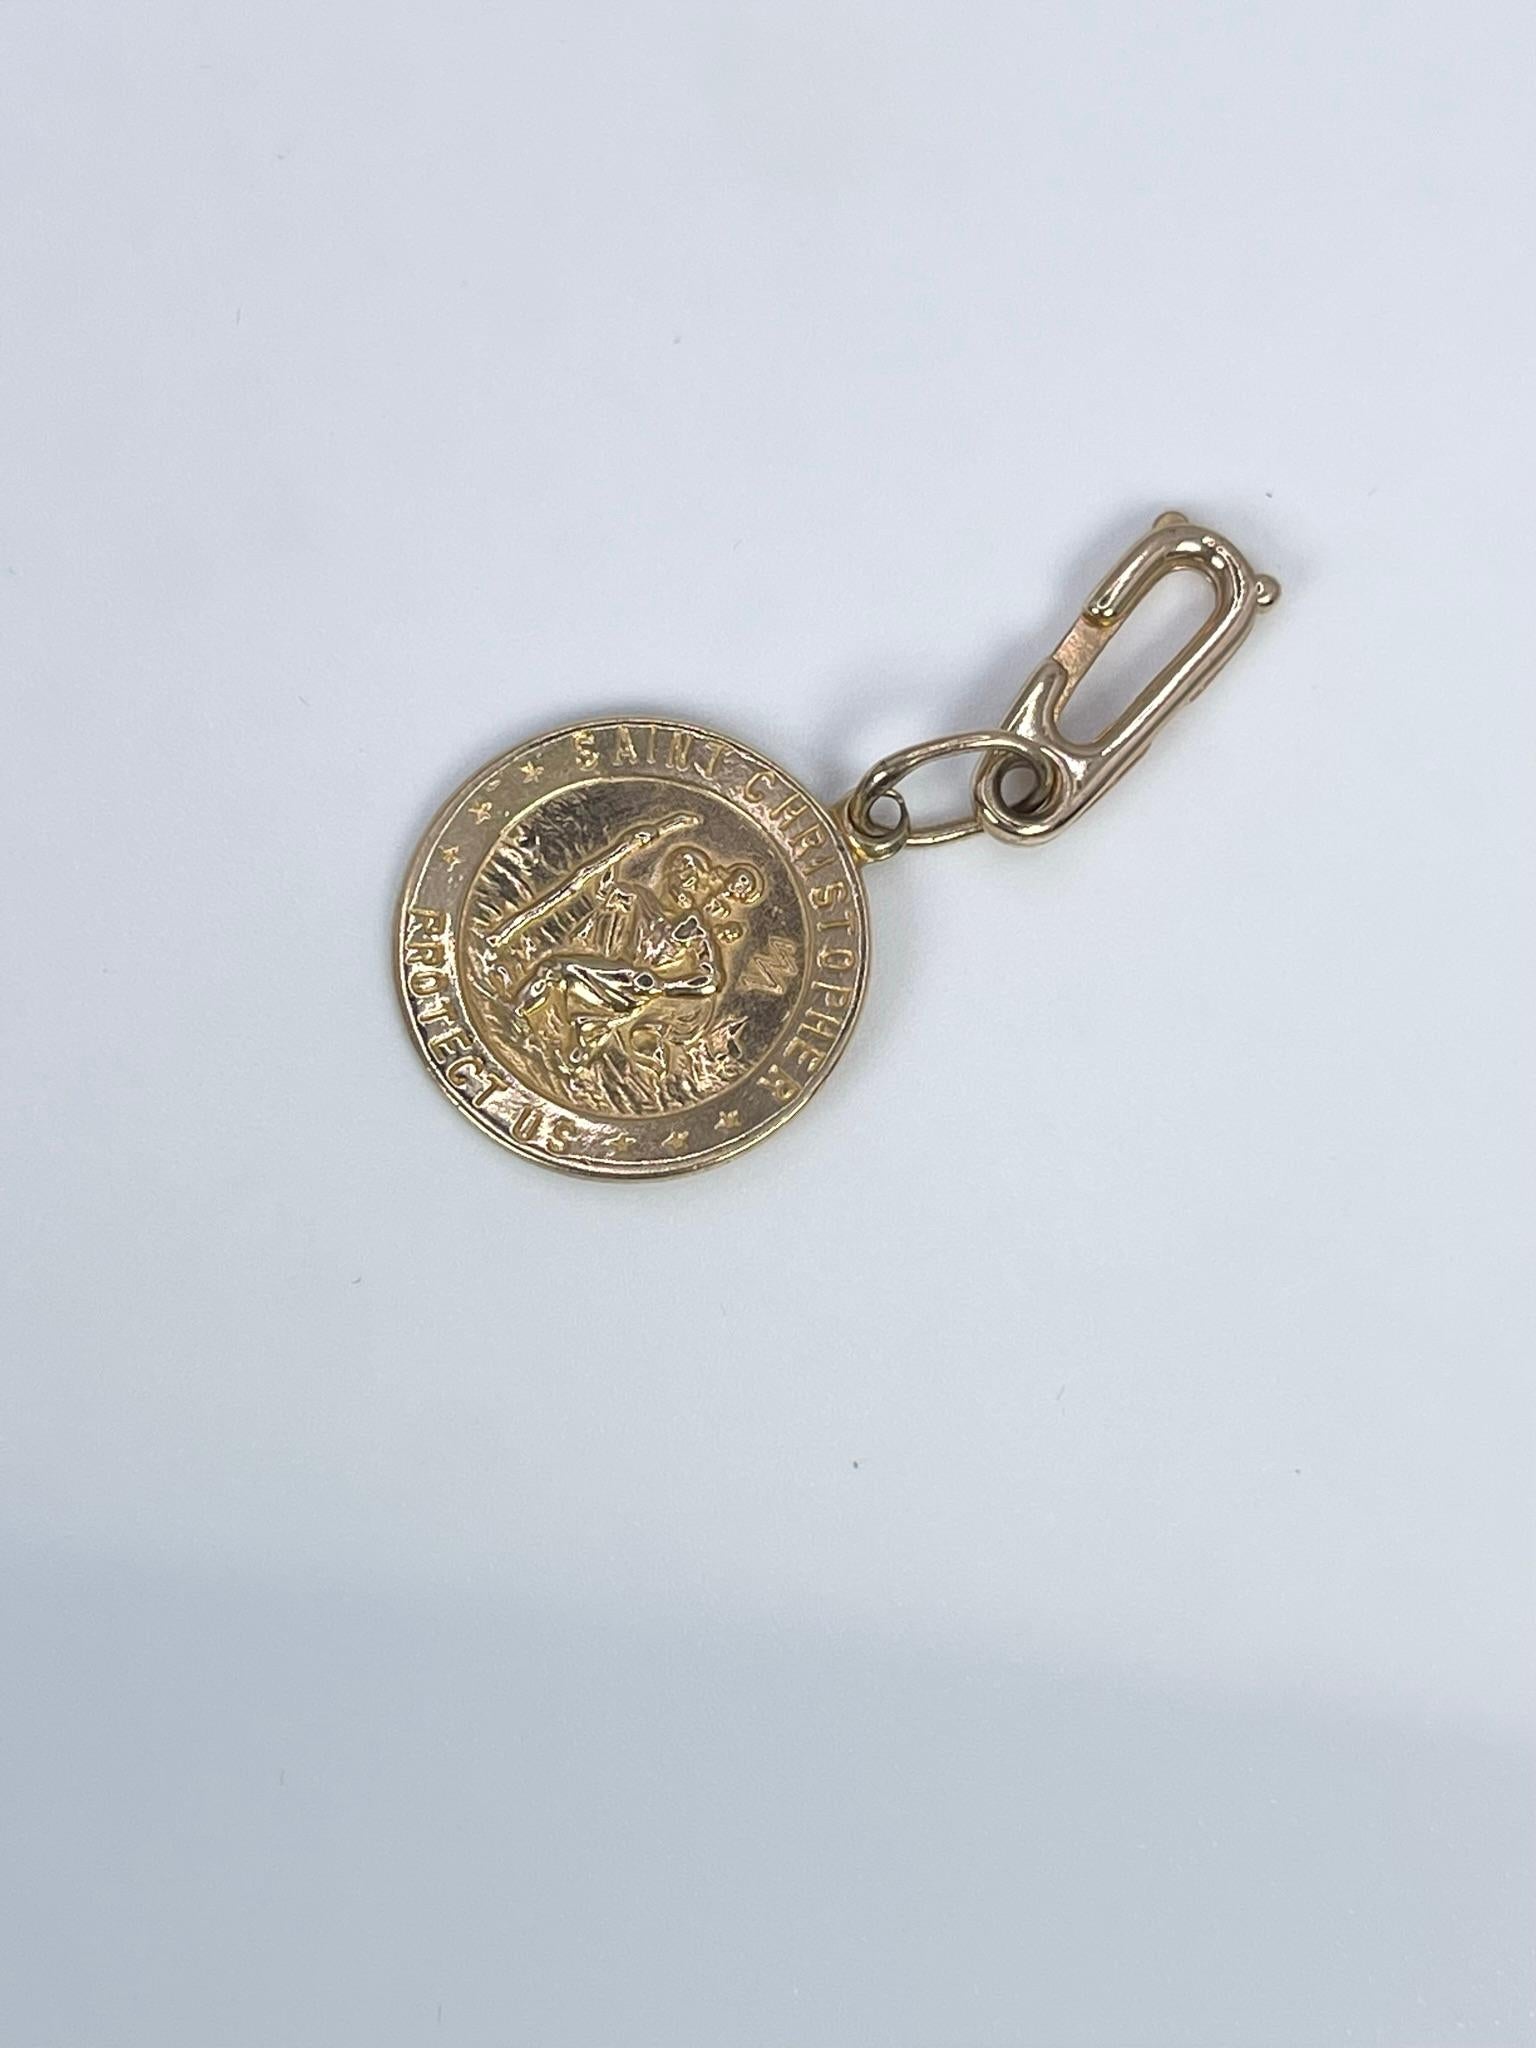 Saint Christopher pendant or charm made in 14KT yellow gold.

GRAM WEIGHT: 2.96gr
GOLD: 14KT yellow gold
SIZE: 41mm long x 18mm wide
ITEM#: 435-00019

WHAT YOU GET AT STAMPAR JEWELERS:
Stampar Jewelers, located in the heart of Jupiter, Florida, is a